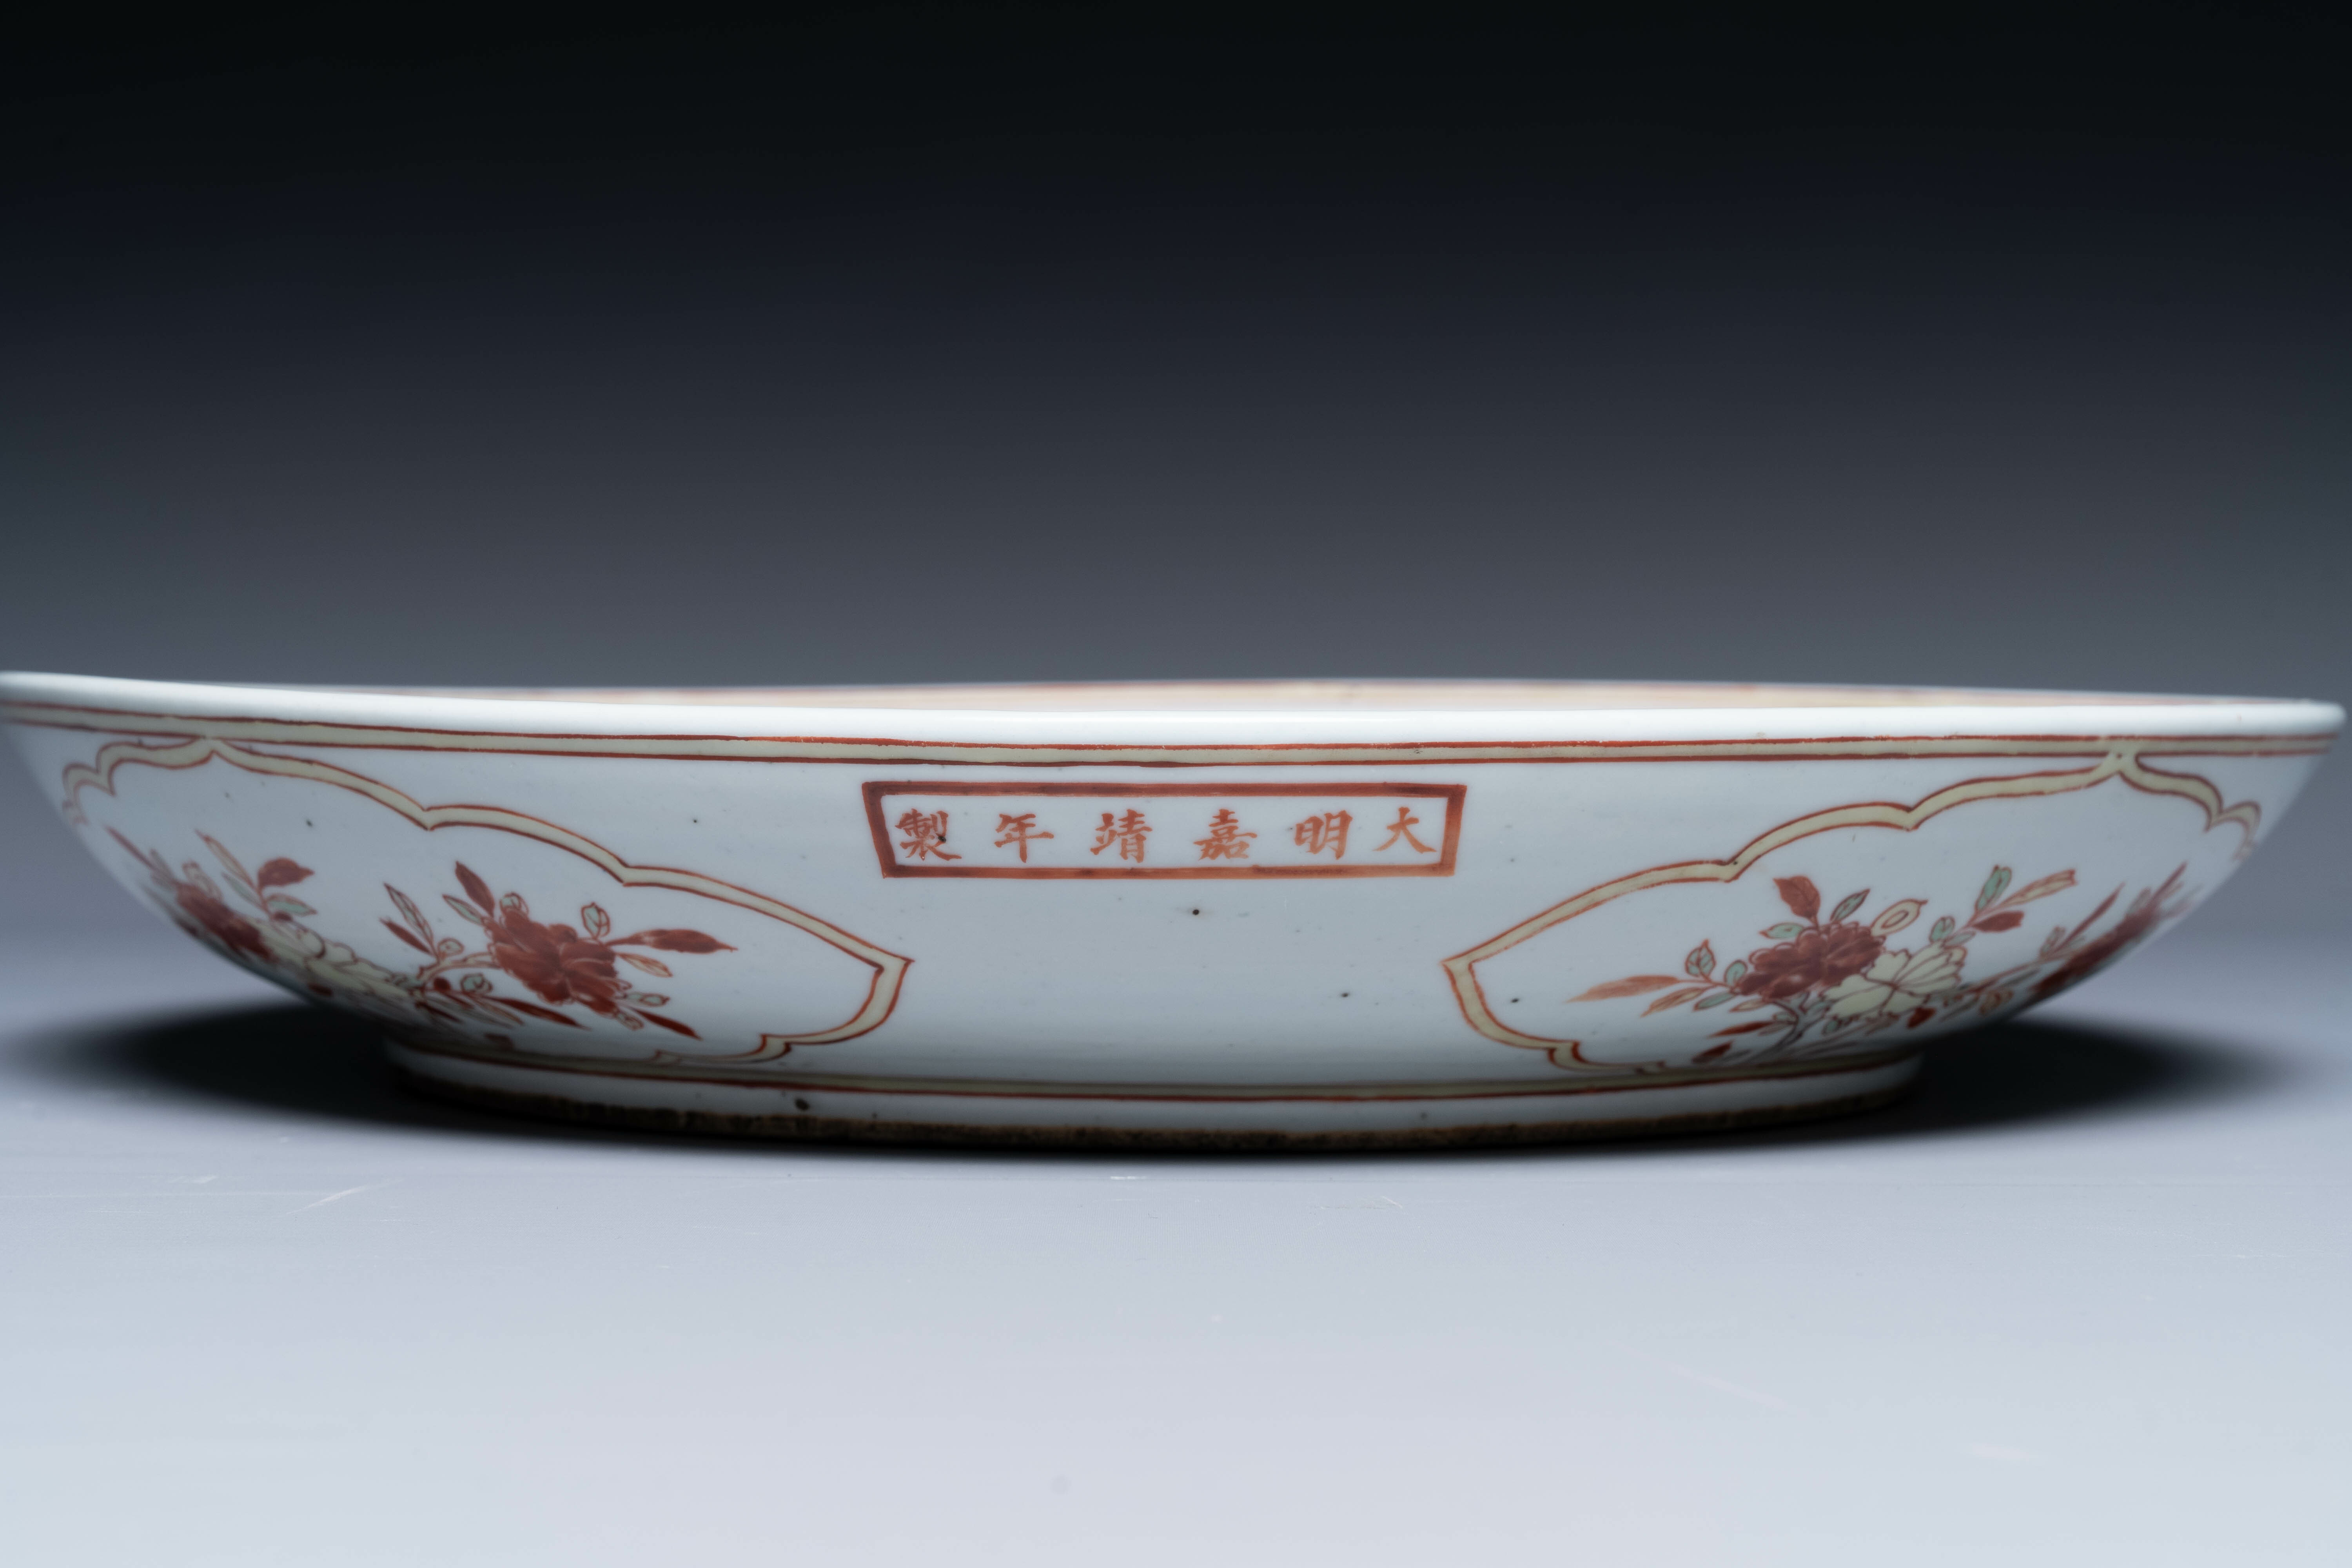 A Chinese wucai dish with figural and floral design, Jiajing mark, Transitional period - Image 2 of 3